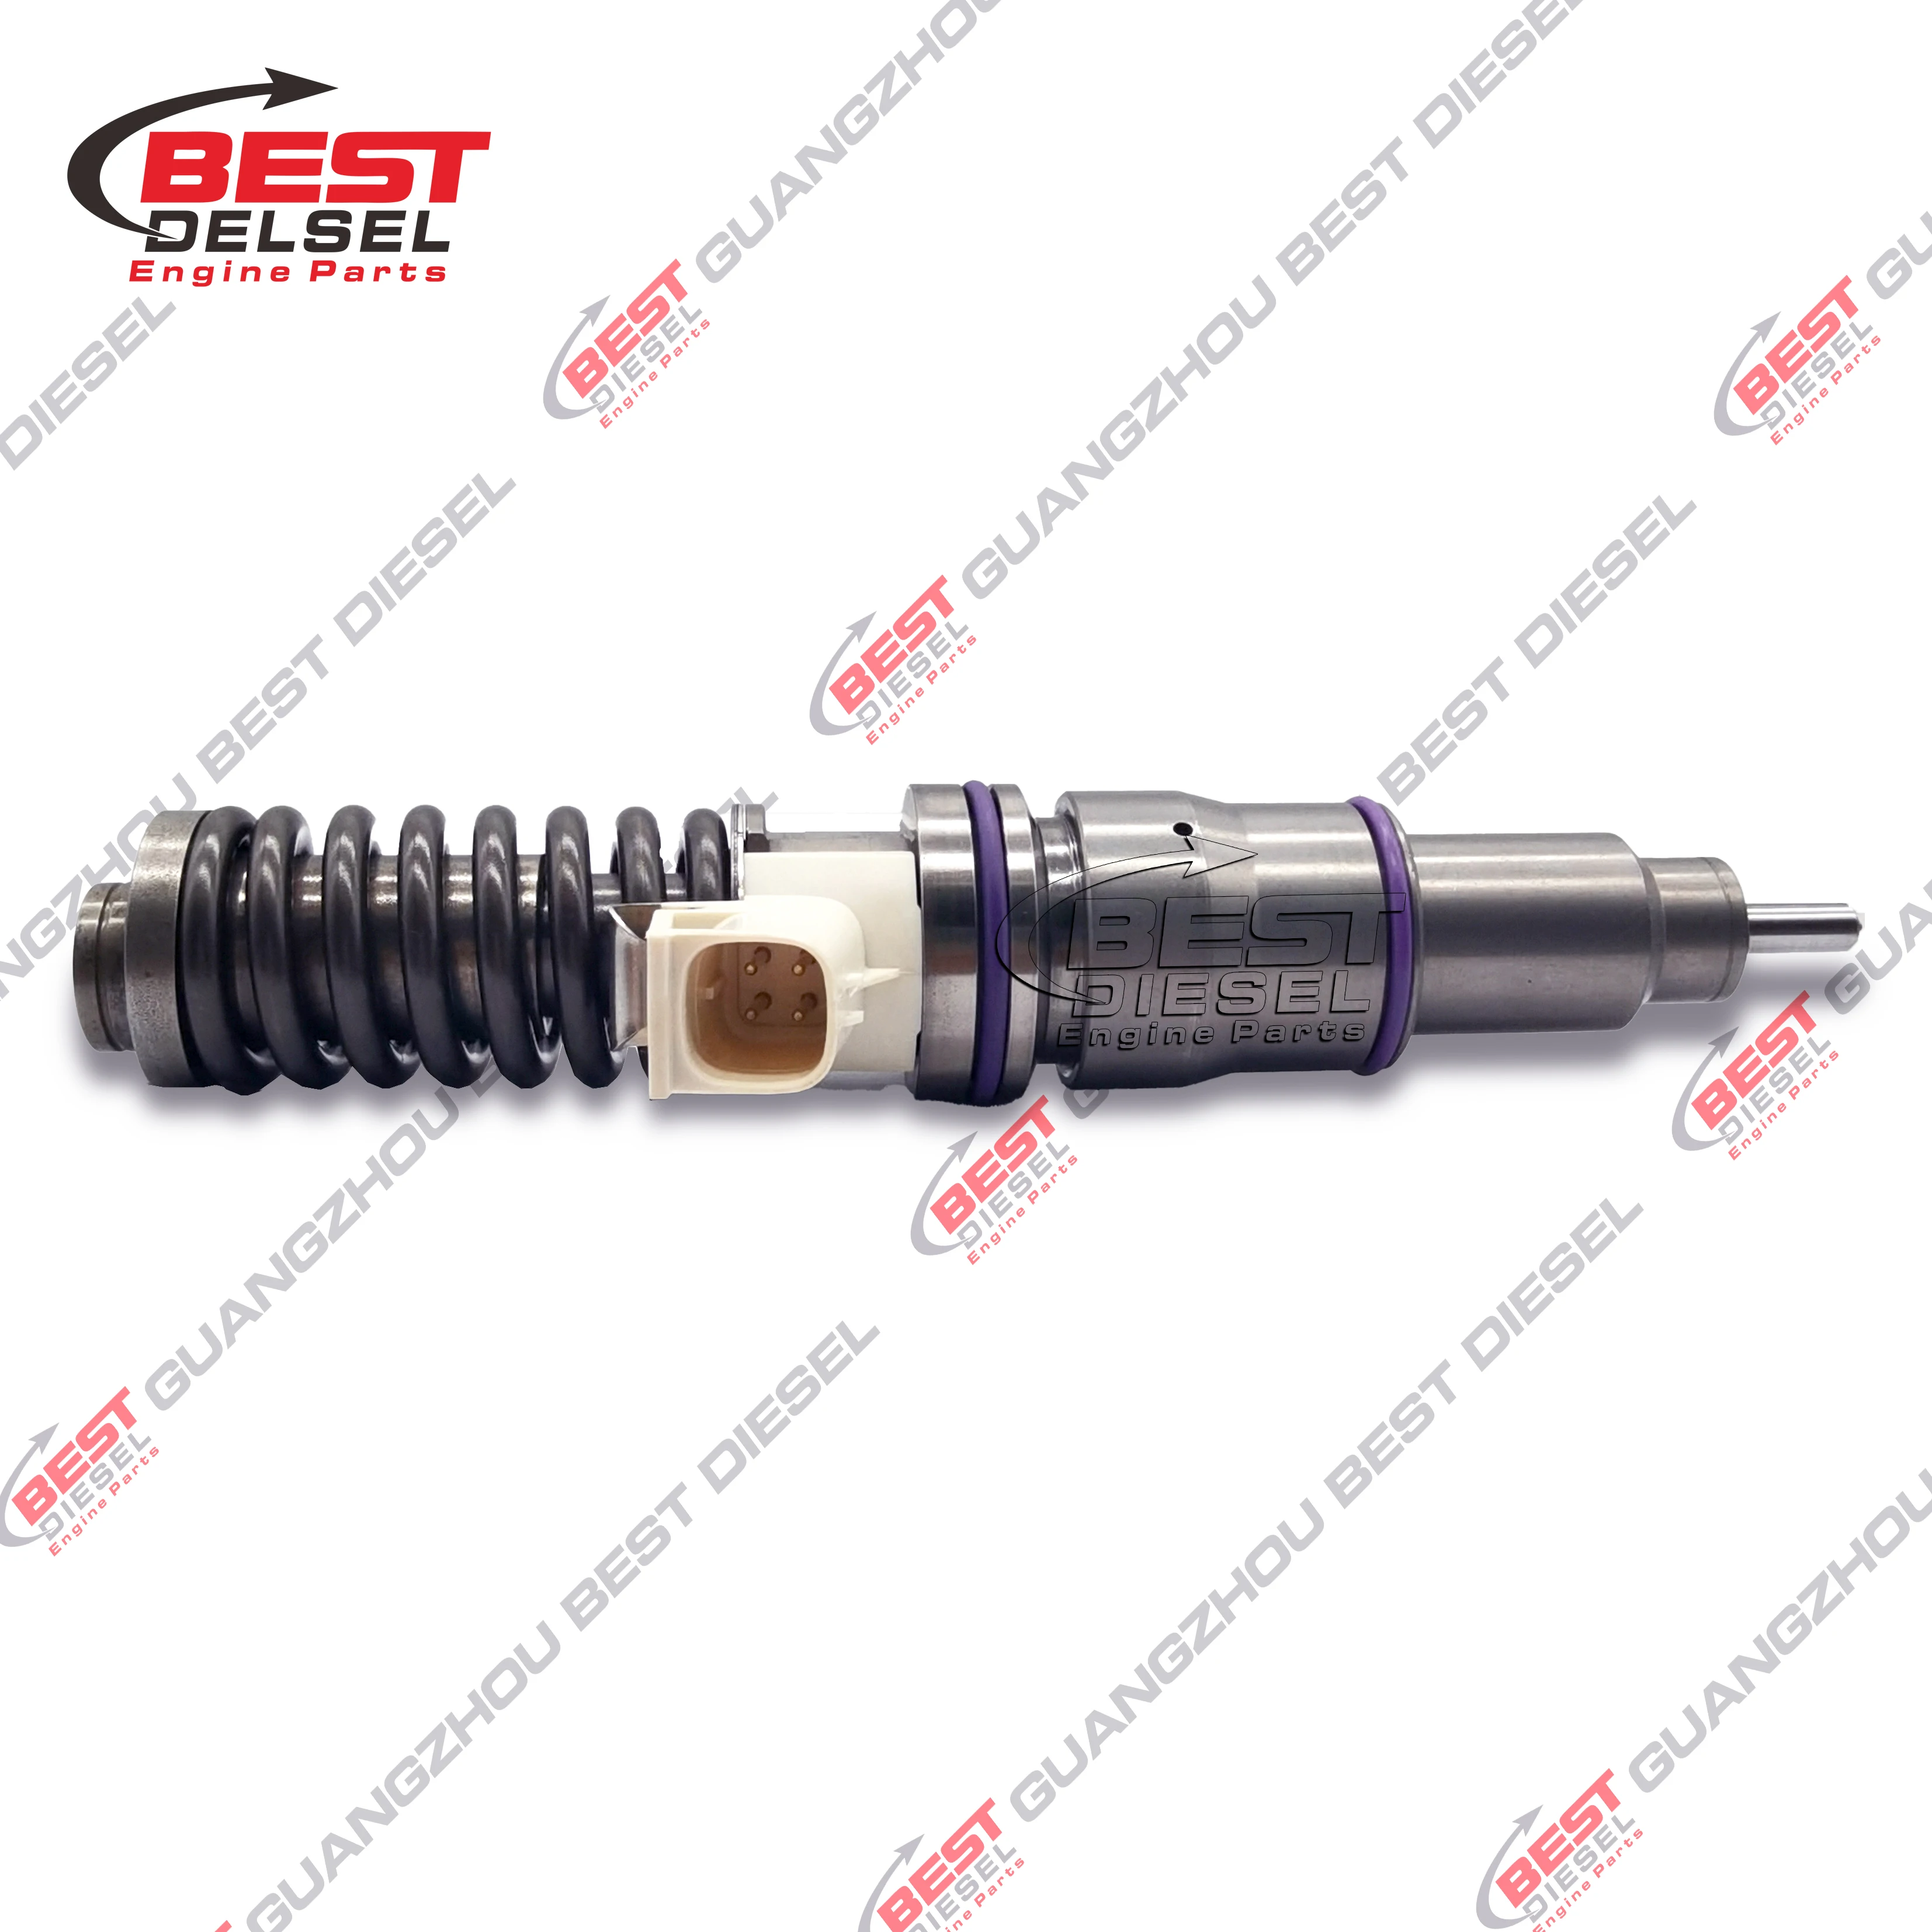 New Diesel Fuel Injector  20564930   for vo-lvo BEBE4D13001 20564930 E3.18 4Pins MD16  engine with good quality